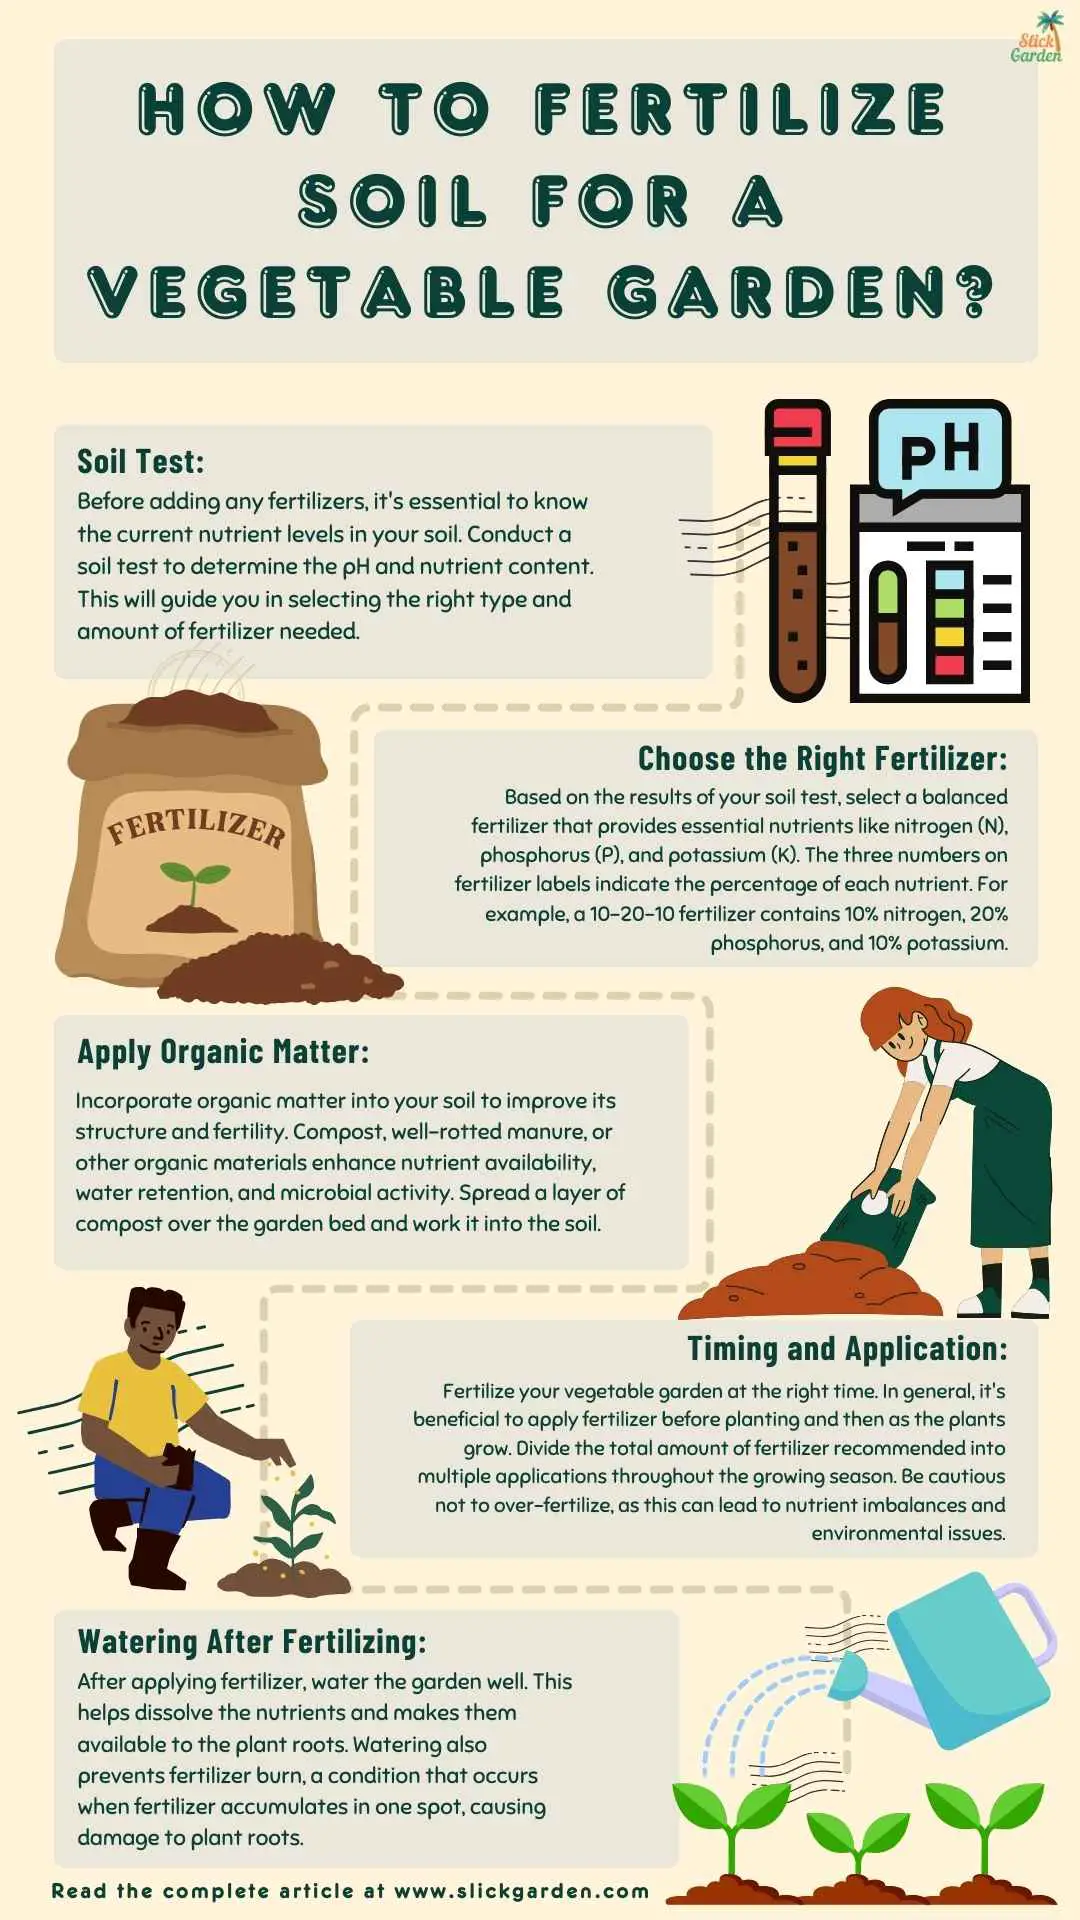 How To Fertilize Soil For A Vegetable Garden infographic